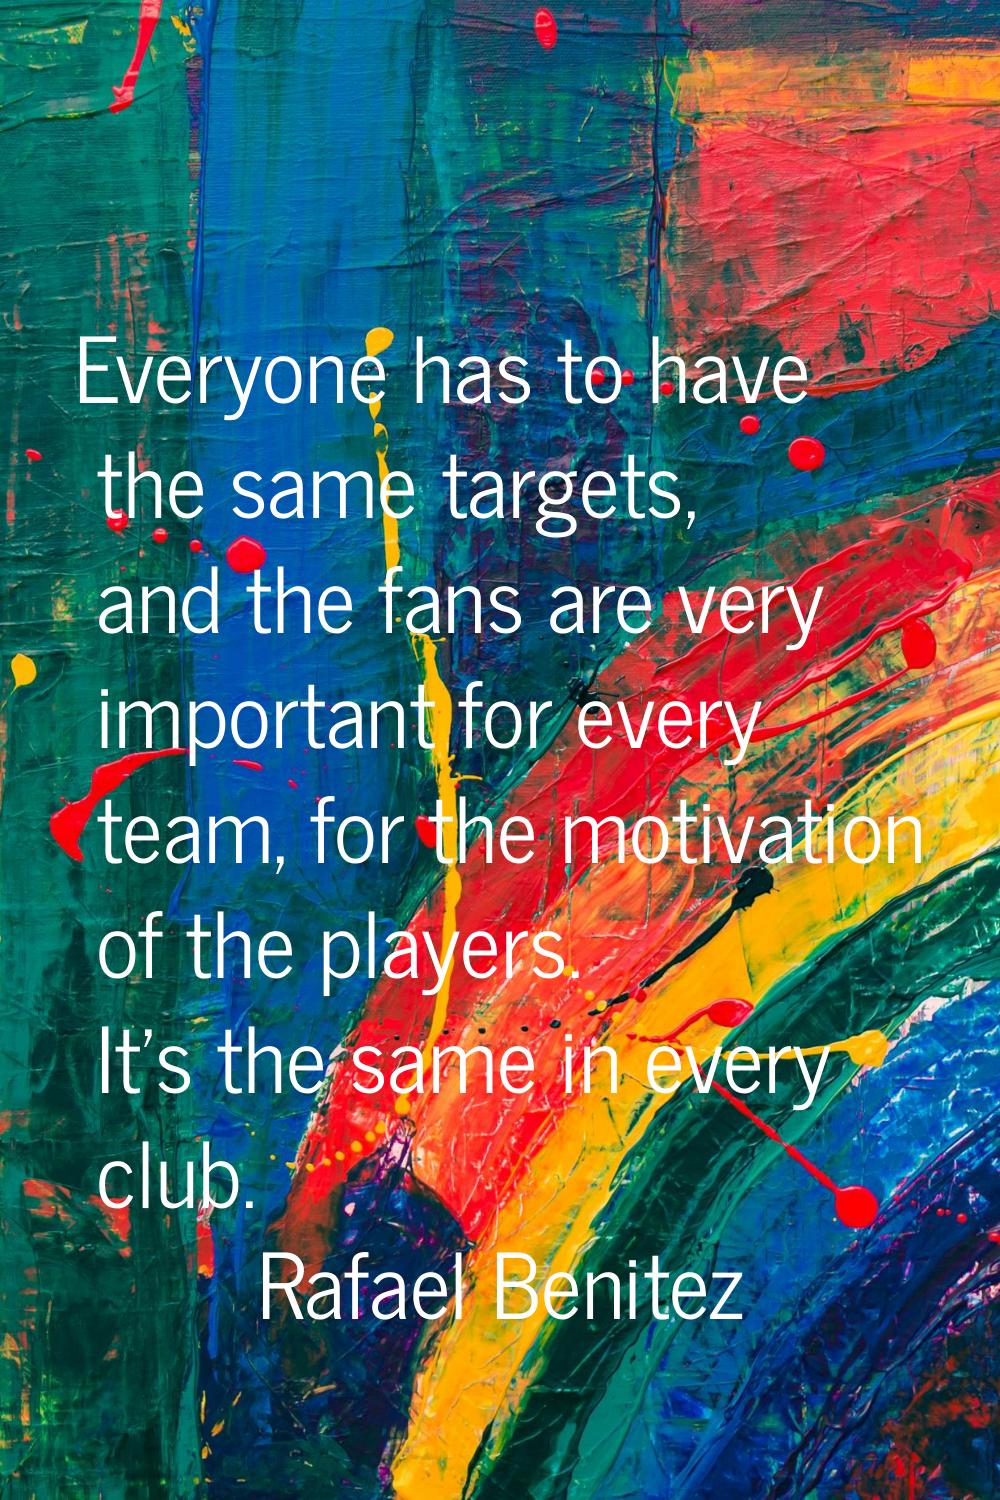 Everyone has to have the same targets, and the fans are very important for every team, for the moti